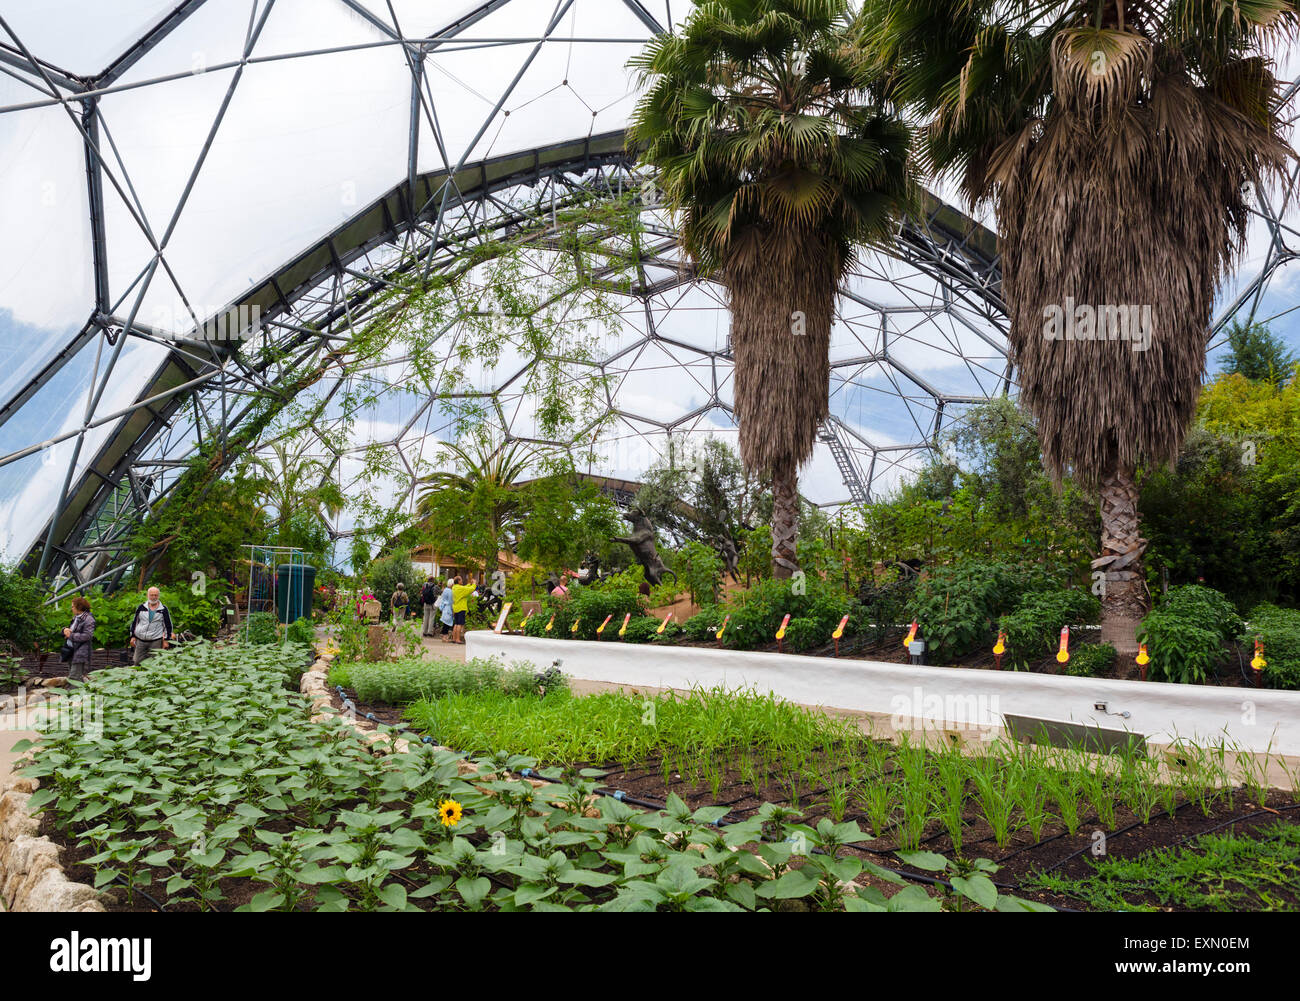 The Mediterranean Biome at the Eden Project, Bodelva, near St Austell, Cornwall, England, UK Stock Photo